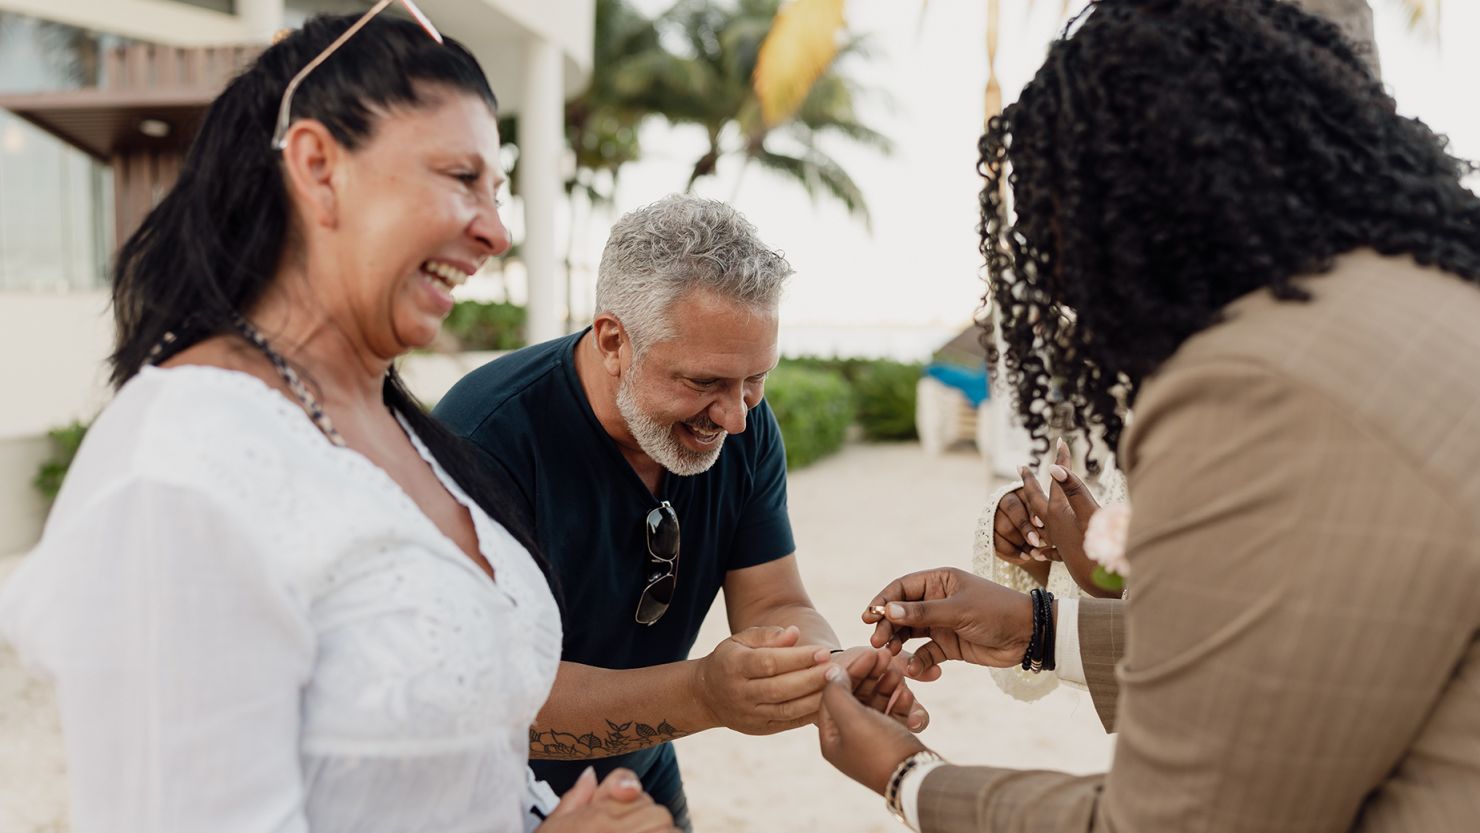 Shannon Jackson (right) and their new spouse Calivé share a moment with the couple (left) that lent them their own wedding rings.